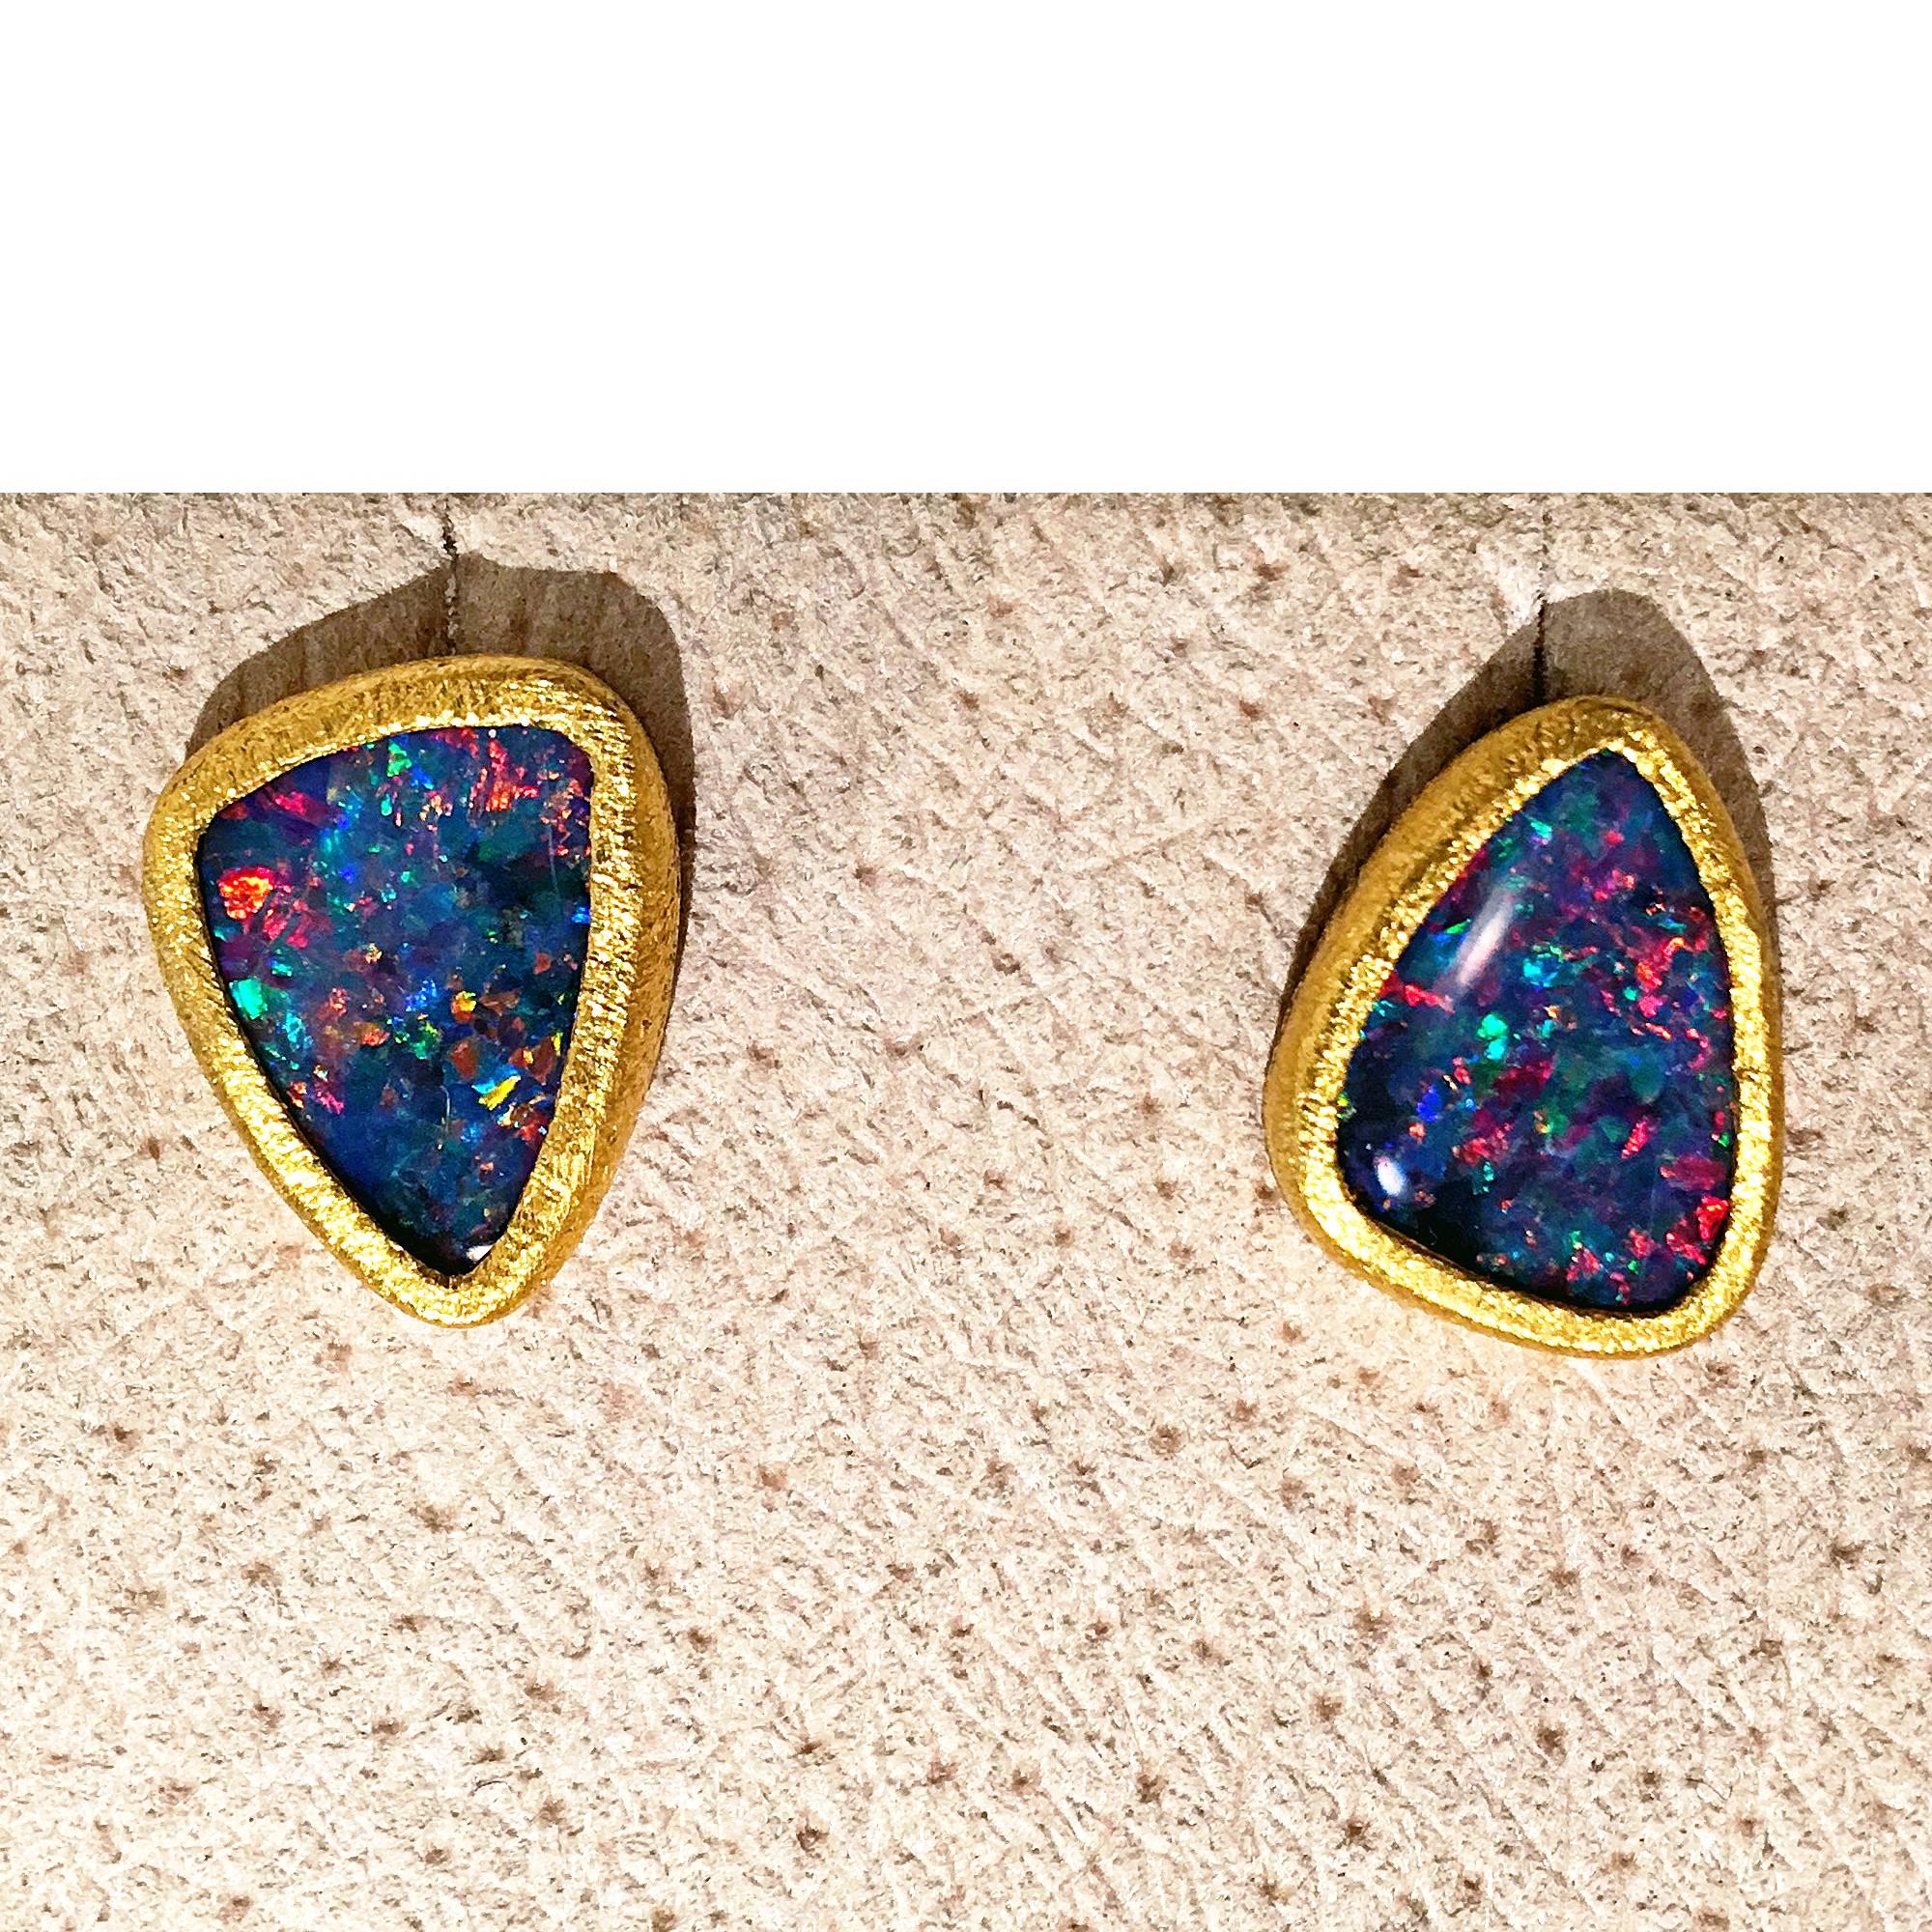 One of a Kind Stud Earrings handcrafted by acclaimed jewelry designer Devta Doolan in February 2017, with violet blue opal doublets exhibiting a vibrant multicolored confetti flash with electrifying green, orange, blue, yellow, violet, and purple